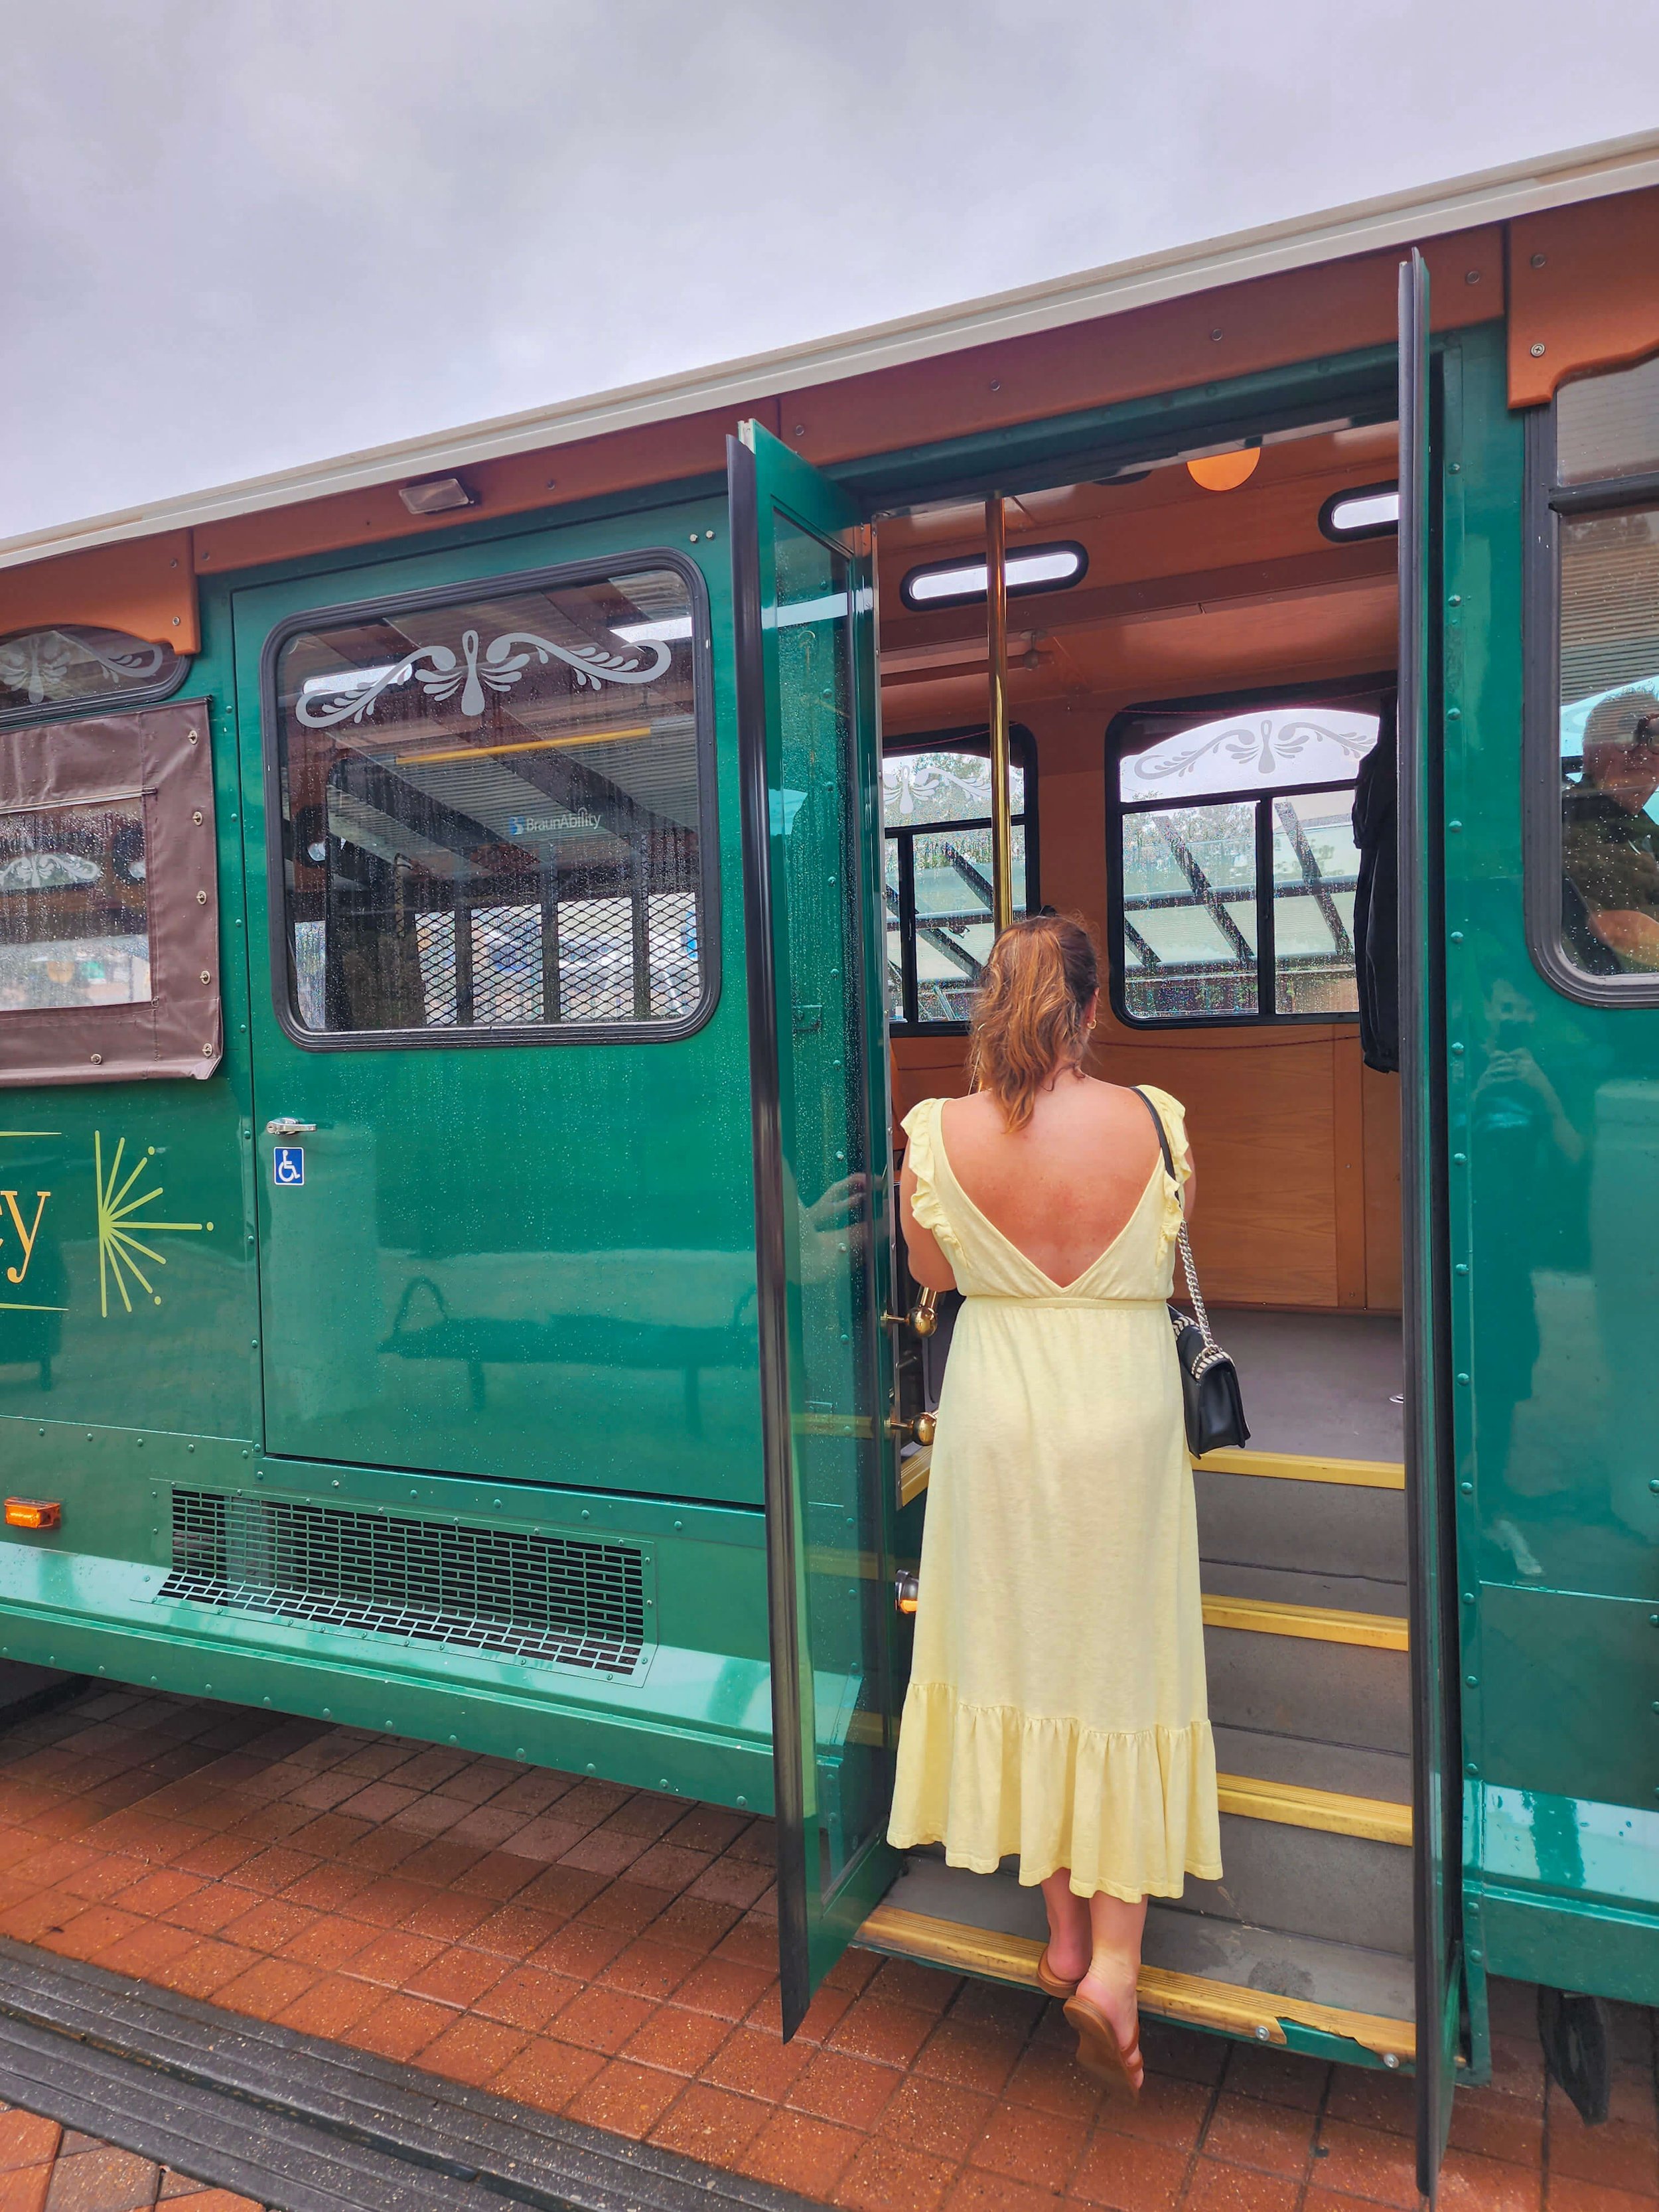 The Woodlands Town Center Trolley